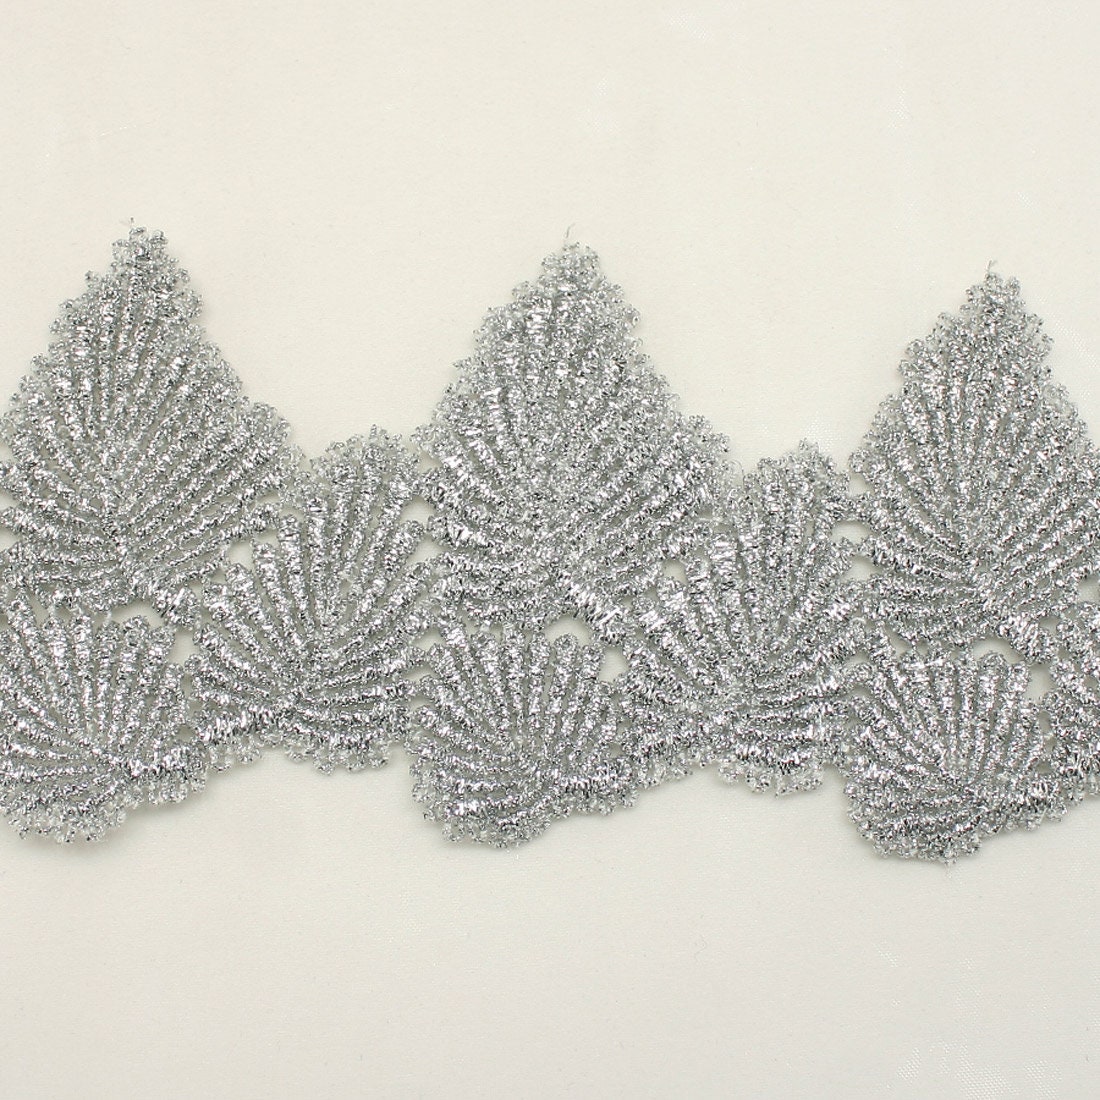 New Item : REF-7927/ LEAVERS TRIMMING LACE, What's New